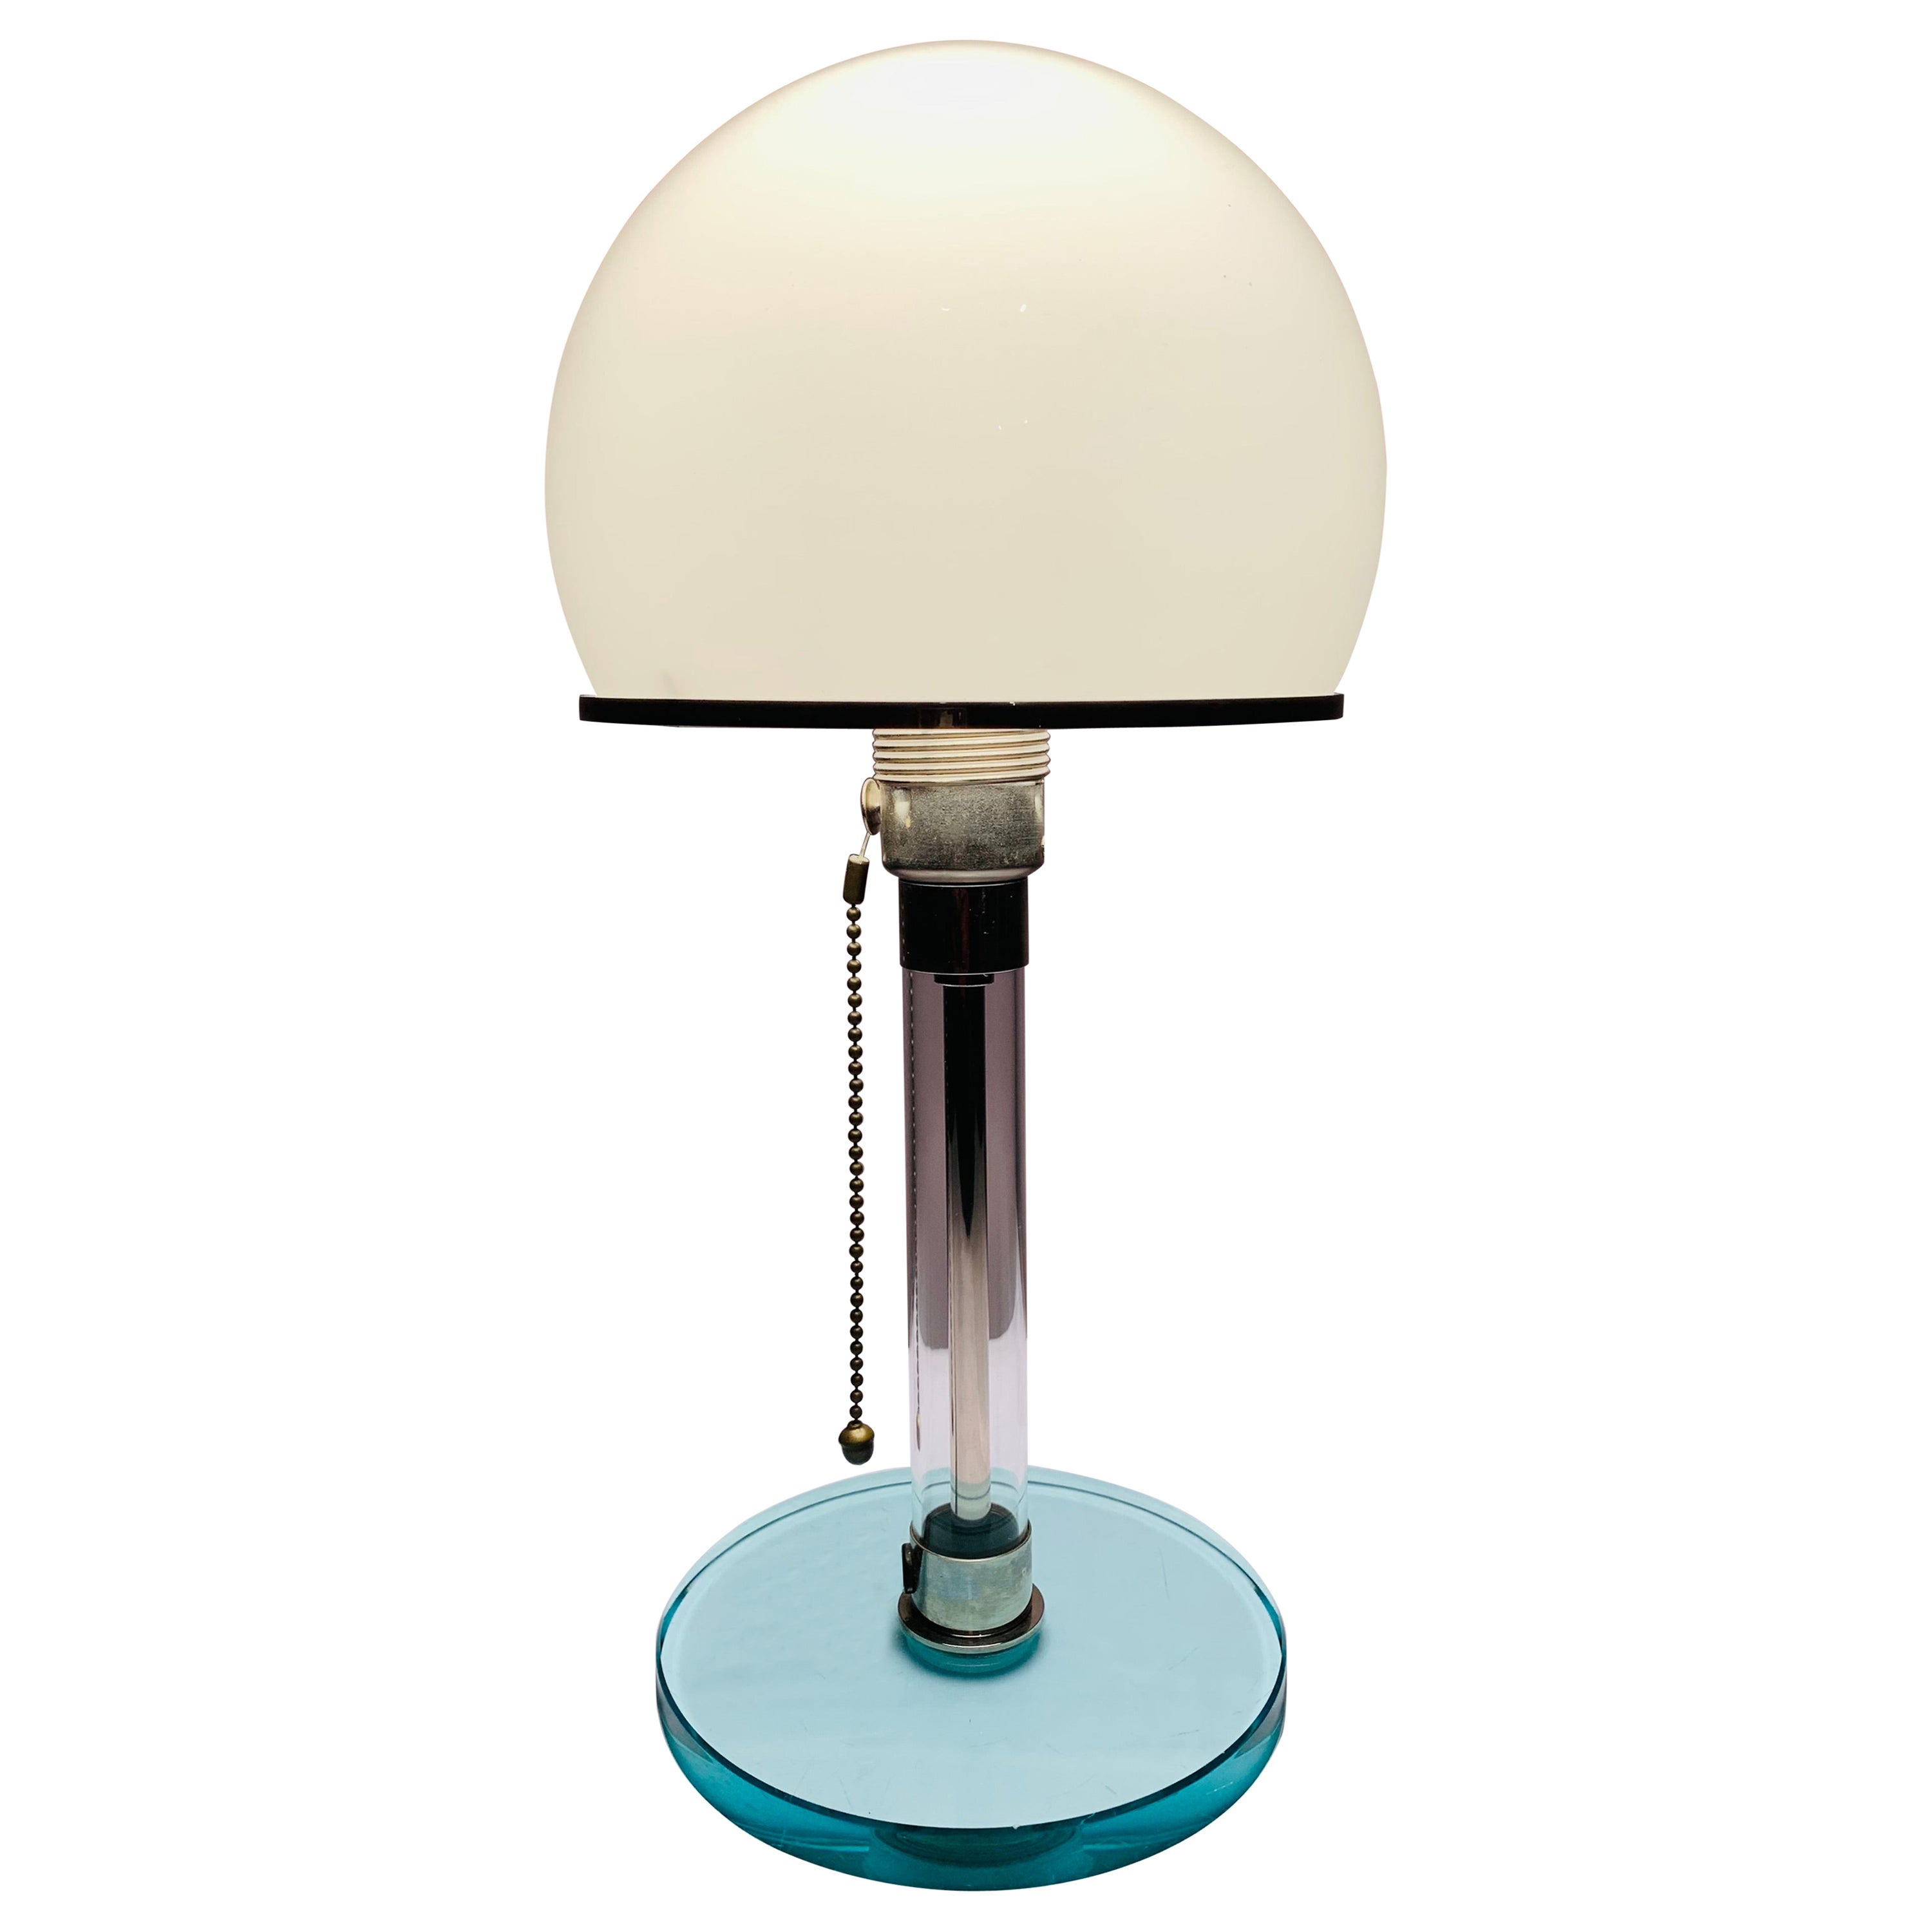 1970s, Wilhelm Wagenfeld WG 24 Bauhaus Chrome and Domed White Glass Table Lamp